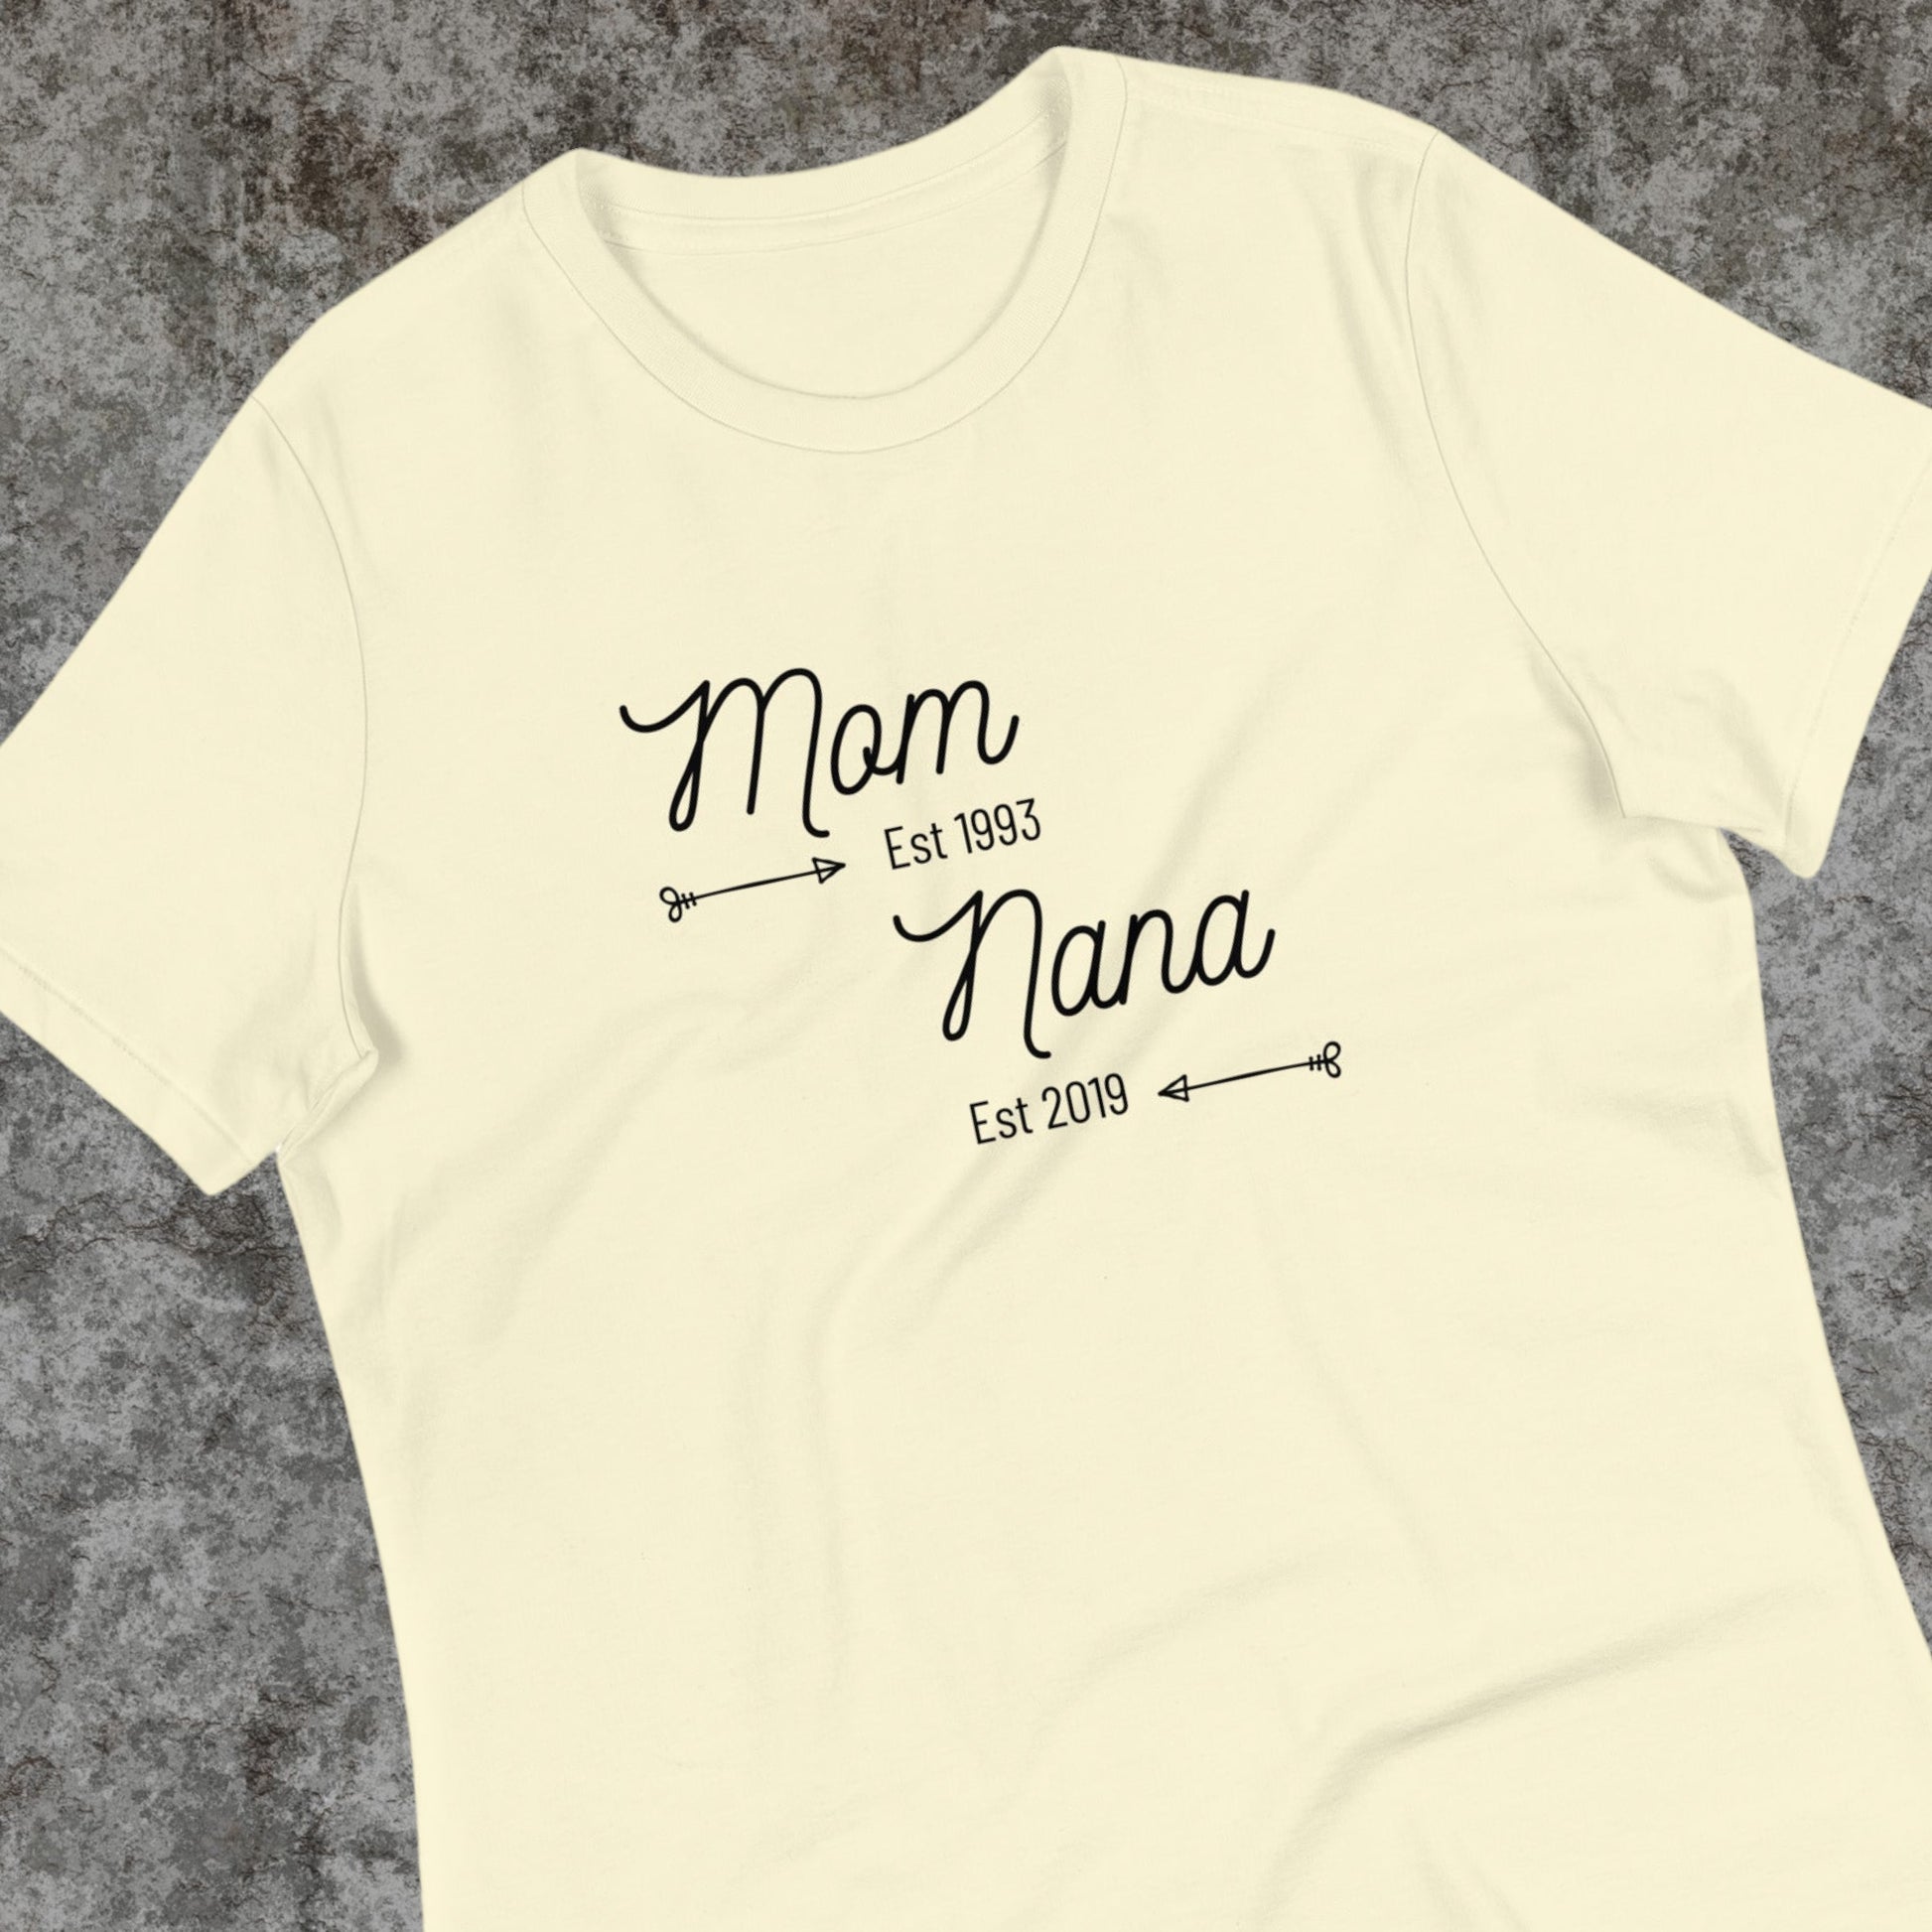 “Mom Est 1993 Nana Est 2019” T-Shirt - Weave Got Gifts - Unique Gifts You Won’t Find Anywhere Else!